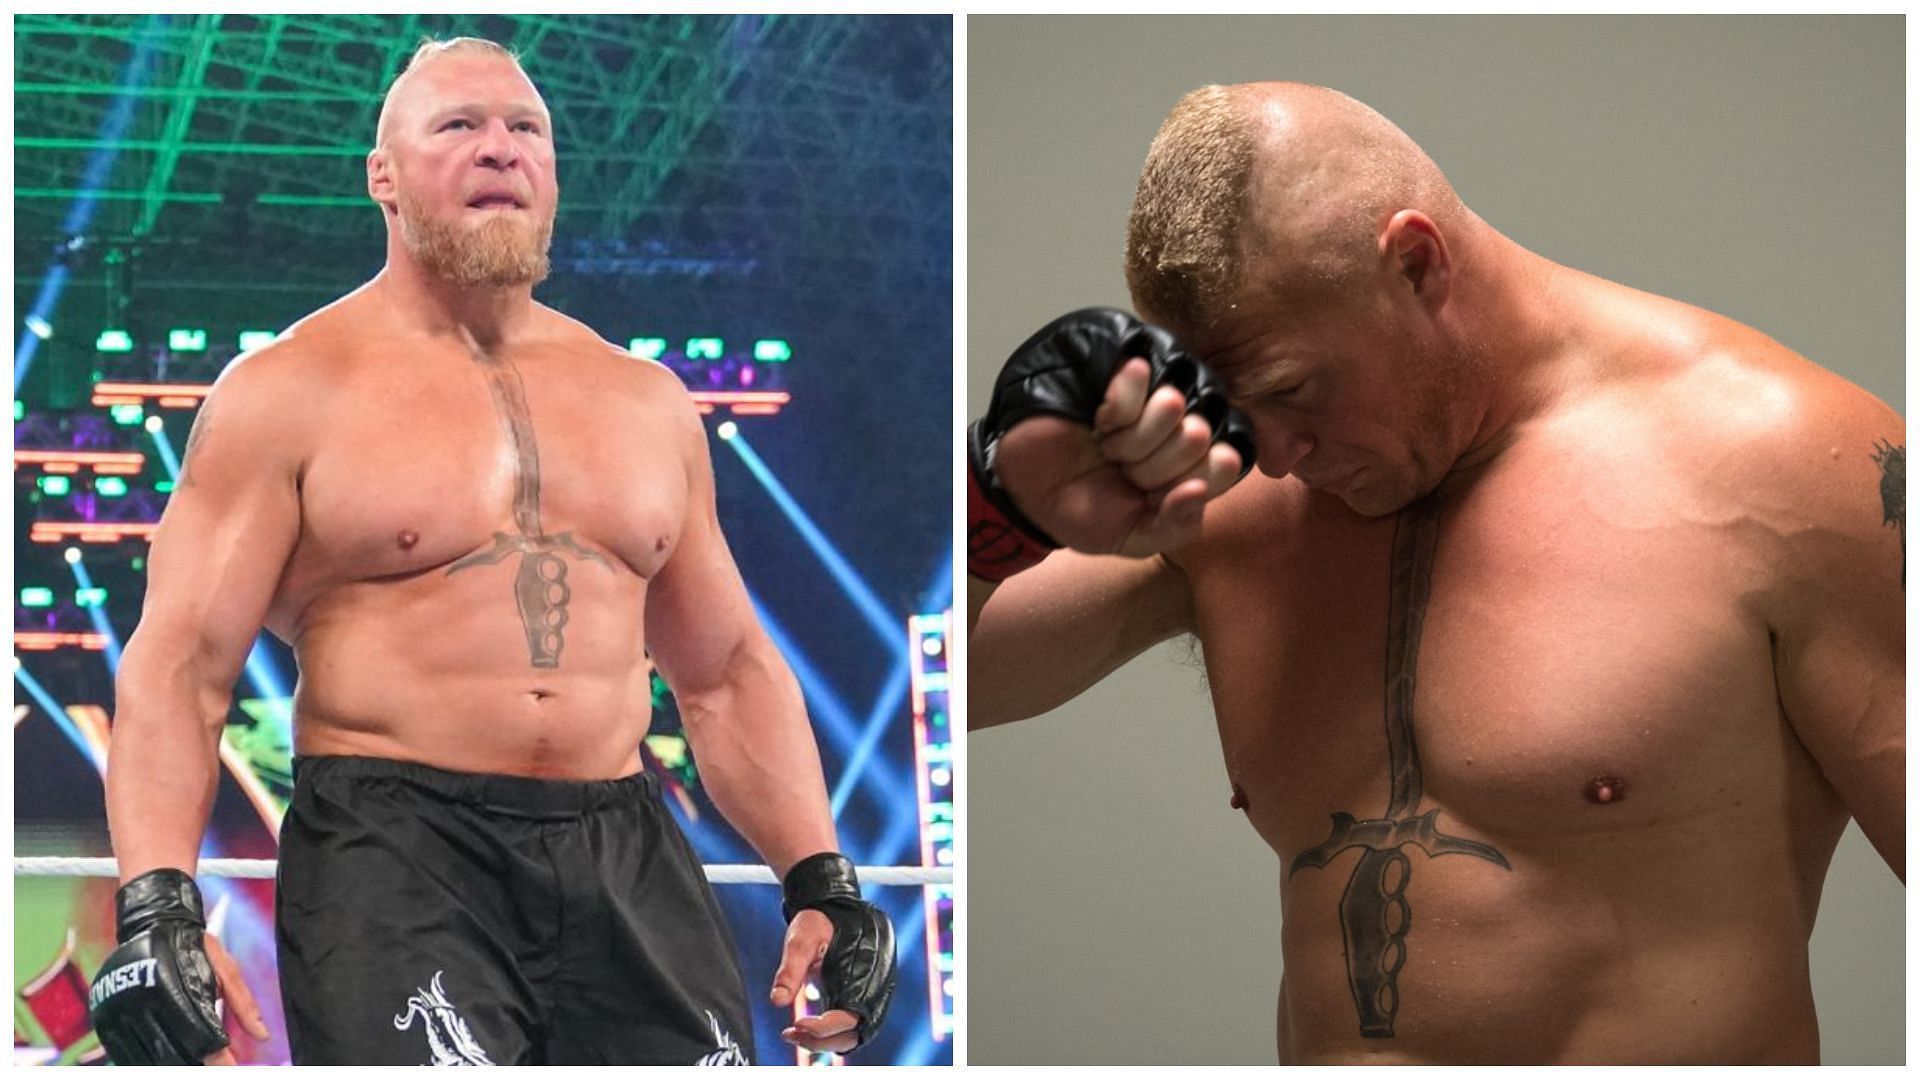 "Man I ain’t never see Brock run before" - Wrestling fans go wild after watching Brock Lesnar being manhandled by WWE star on RAW